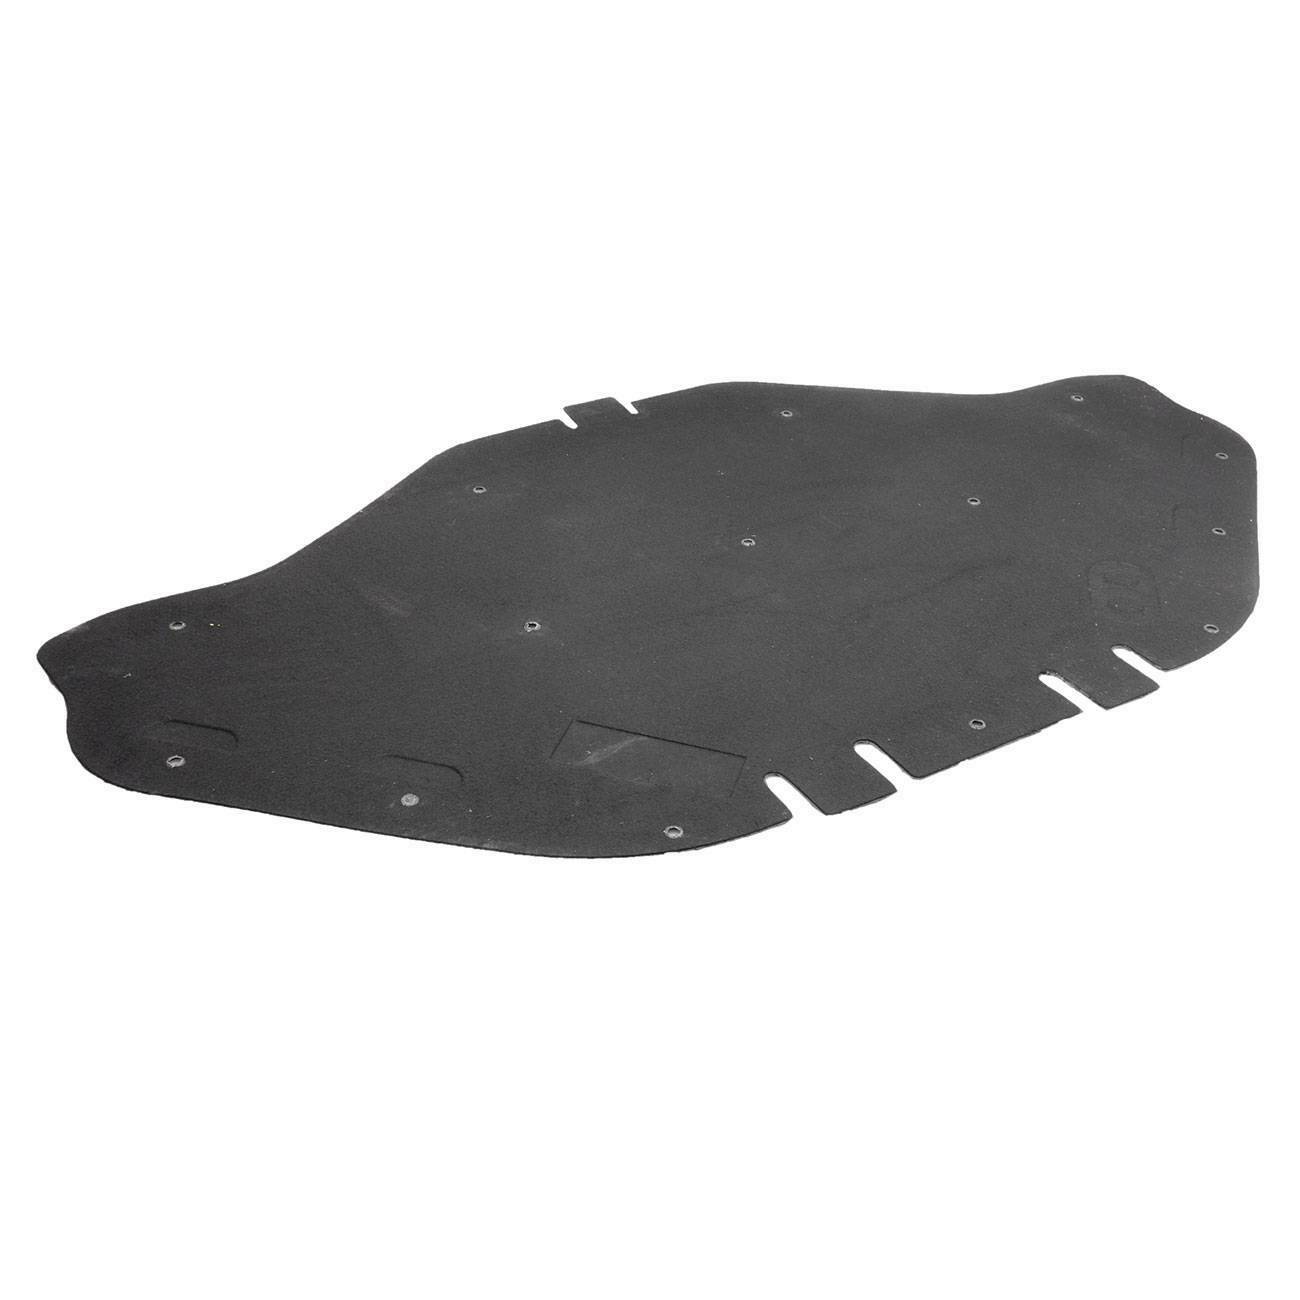 Hood Insulation Pad Heat Shield Cover for Mercedes W166 X166 ML350 ML400 German Made